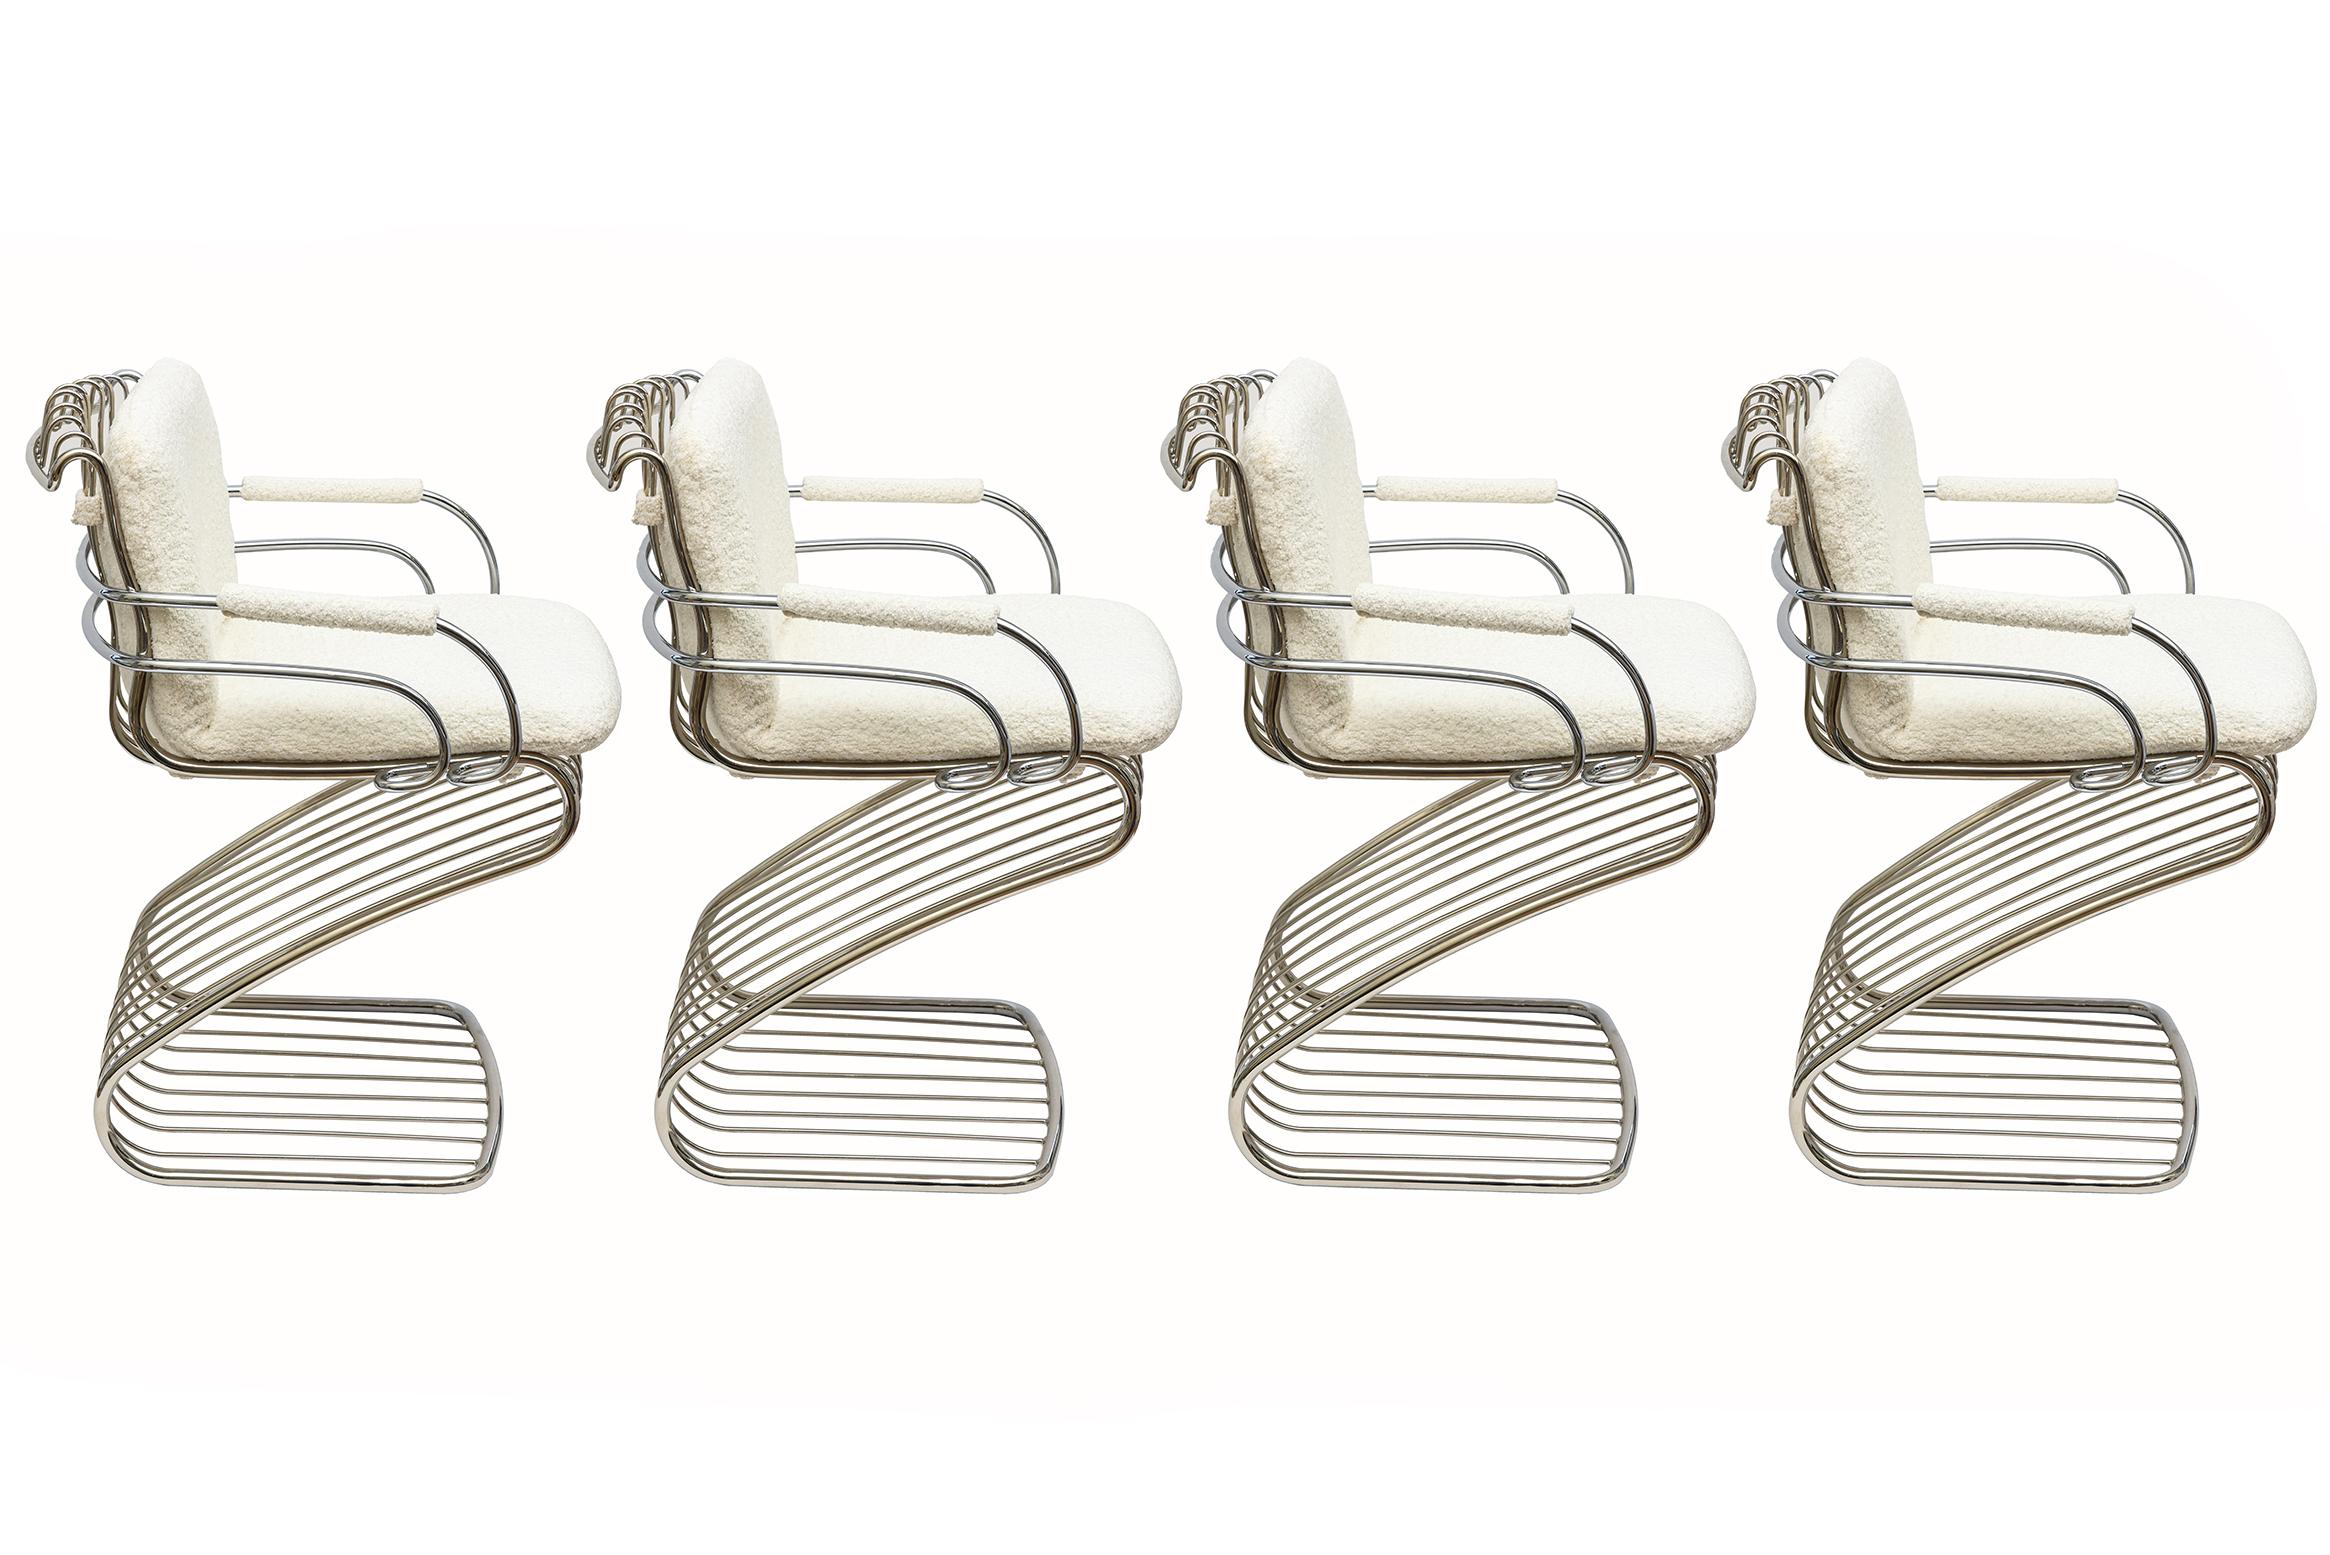 This vintage set of 4 fully restored modernsist rare Italian Gastone Rinaldi dining chairs for Rima cantilever. These are from the 70's. They have a unique fluid form of tubular curved bars that are very sculptural in their entity and angles. They